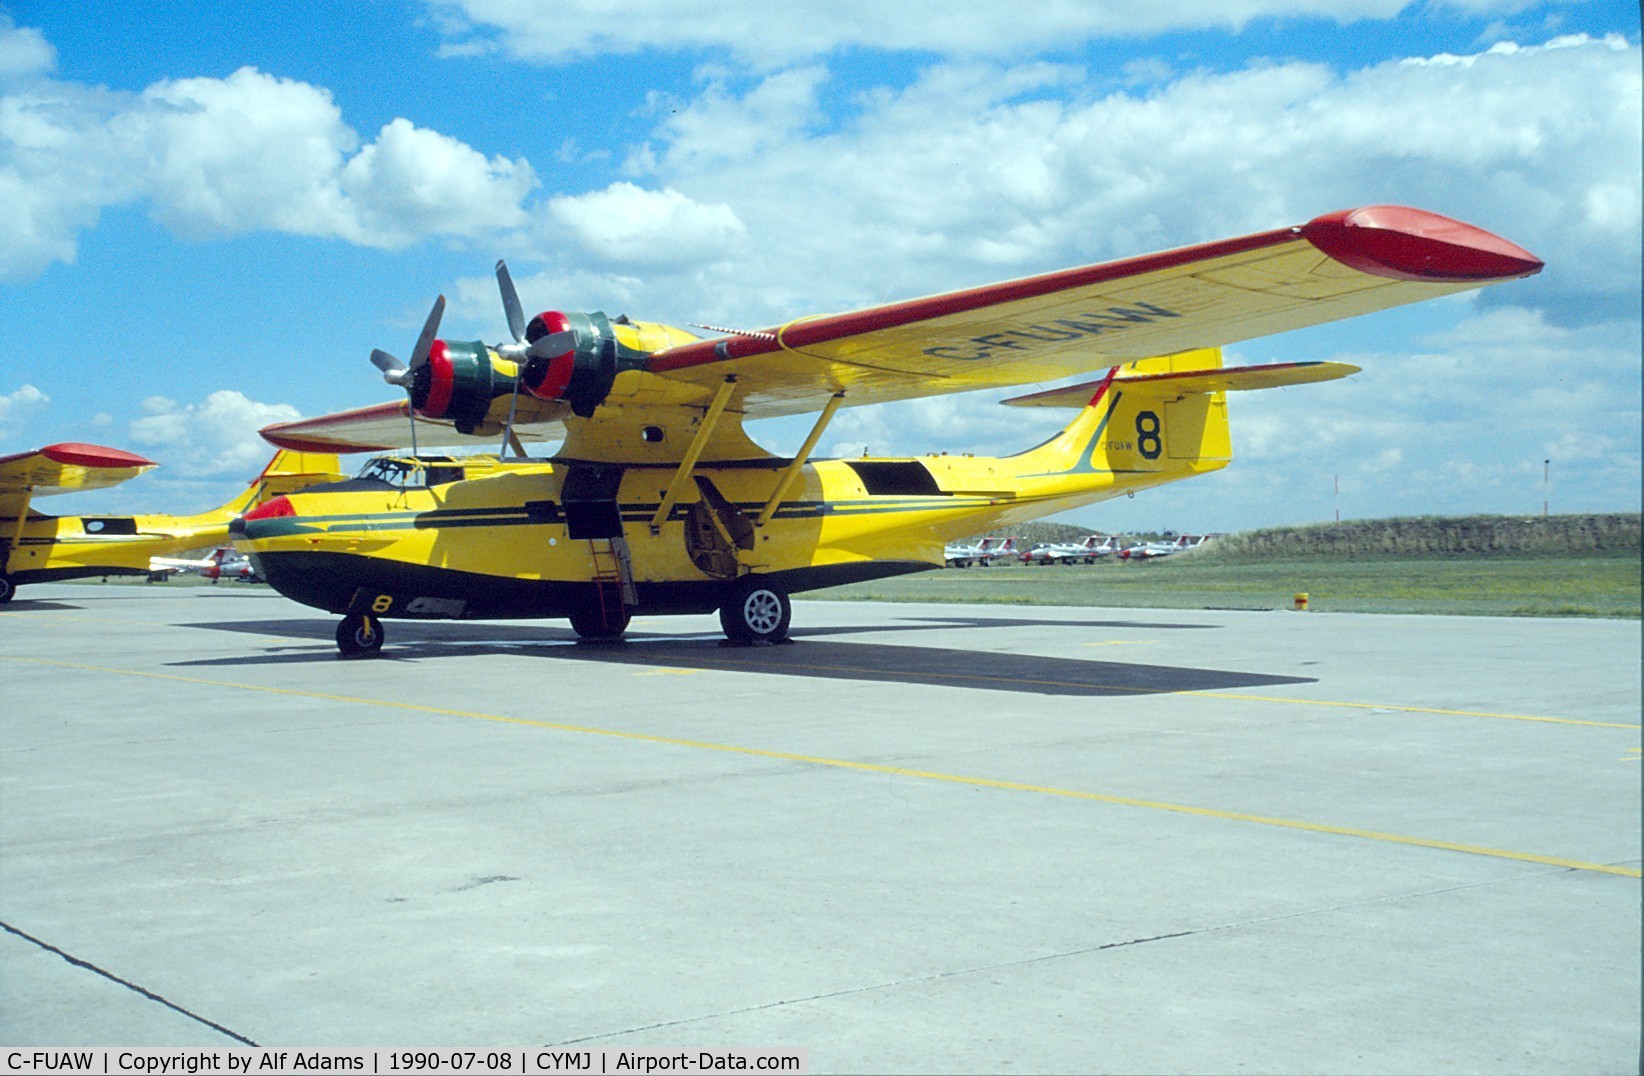 C-FUAW, 1943 Consolidated Vultee PBY-5A Canso A C/N CV 201, Displayed at the annual airshow at Canadian Forces Base Moose Jaw, Saskatchewan, Canada in 1990.